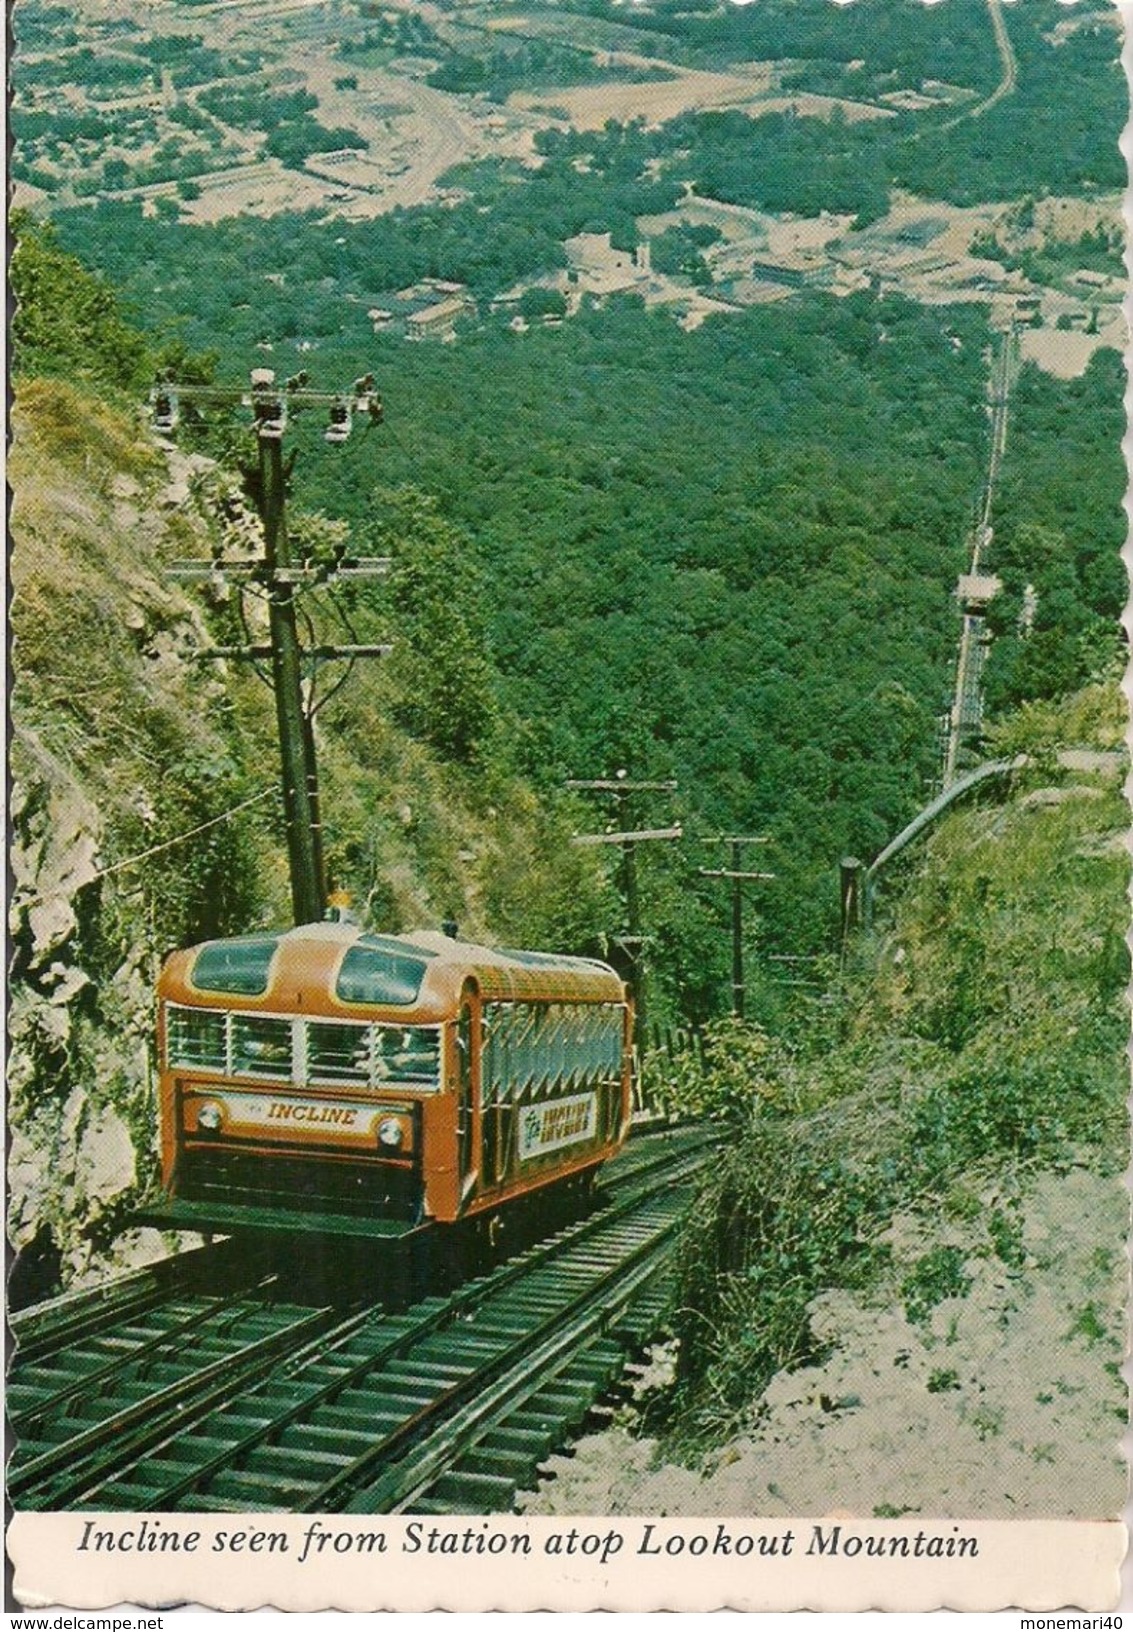 ATOP LOOKOUT MOUNTAIN - INCLINE SEEN FROM STATION. - Chattanooga